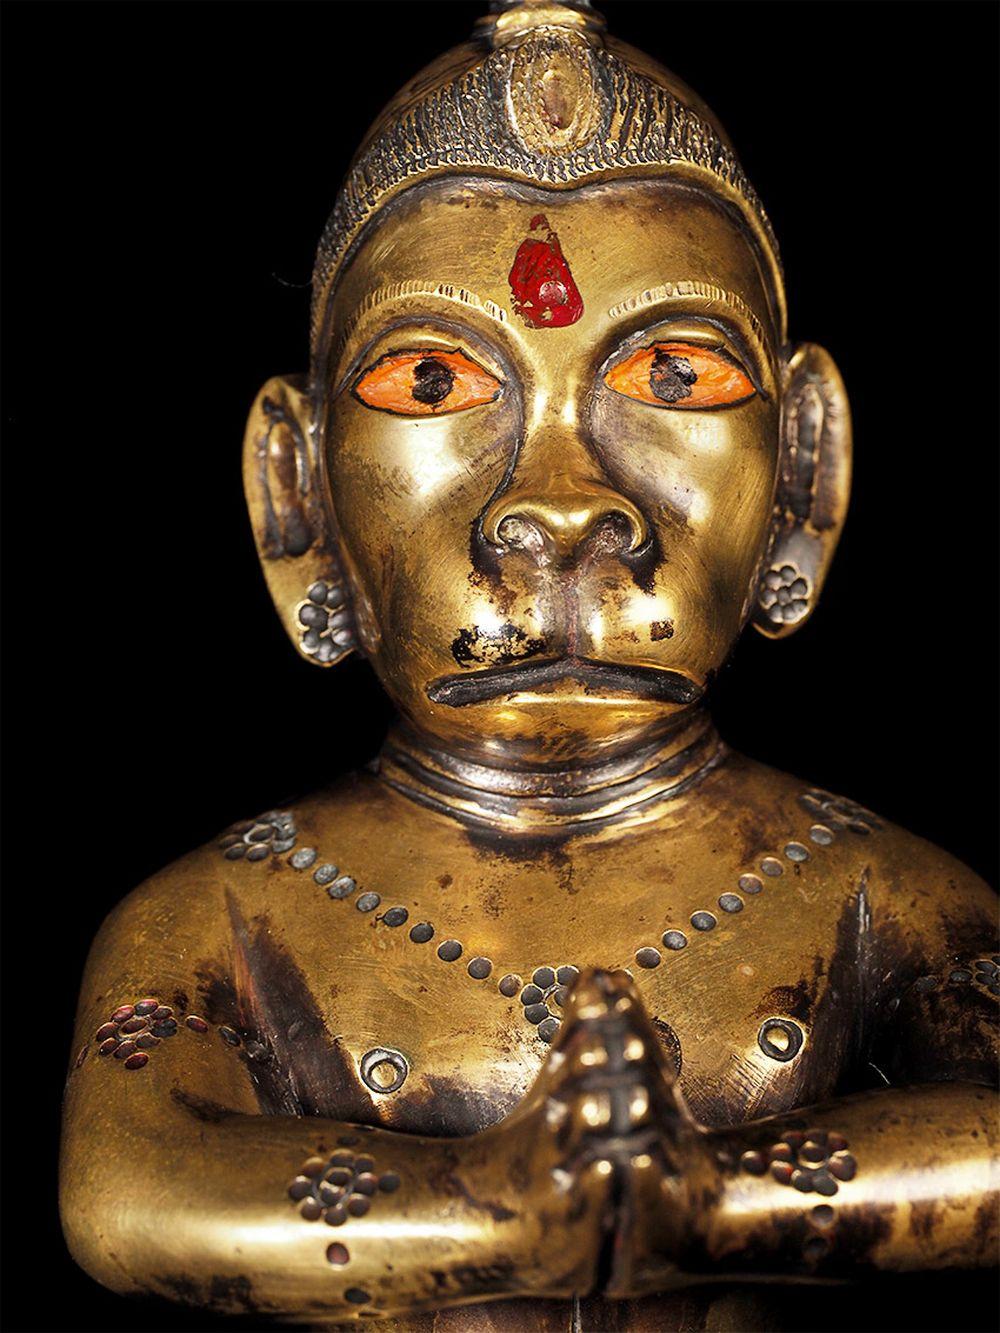 Rare and supremely beautiful 18thC Hanuman cast of a special alloy that may contain precious metals. Red band around the base. There may have been an original red color that wore off in spots that were replaced over time. The eyes and minute remains